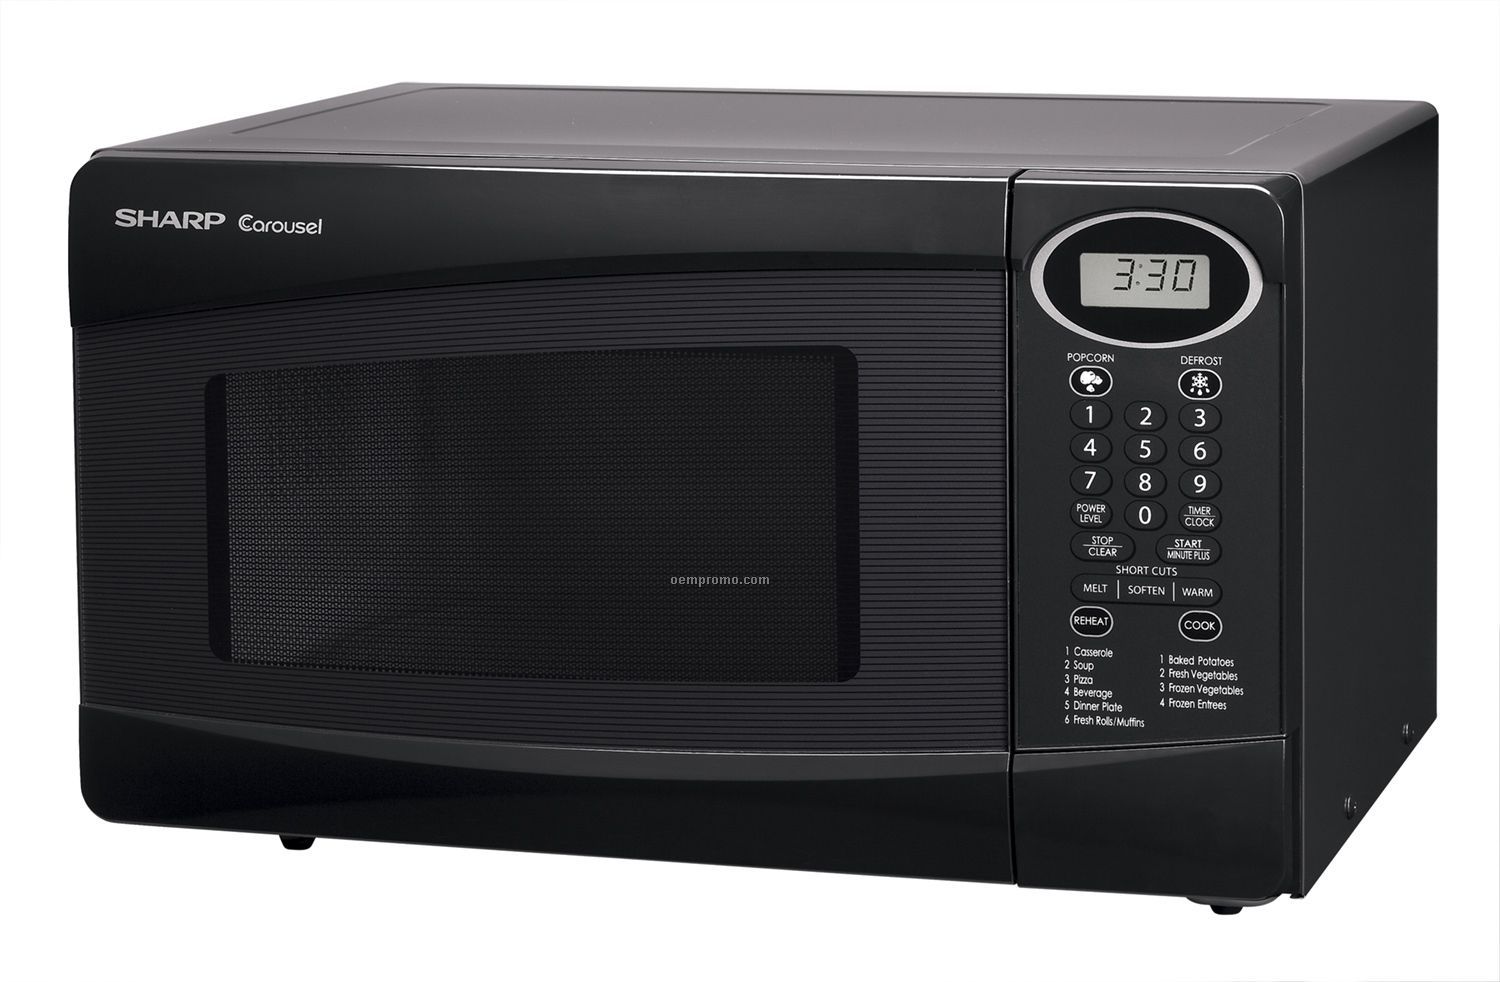 Sharp 0.8 Cu. Ft. Microwave Oven